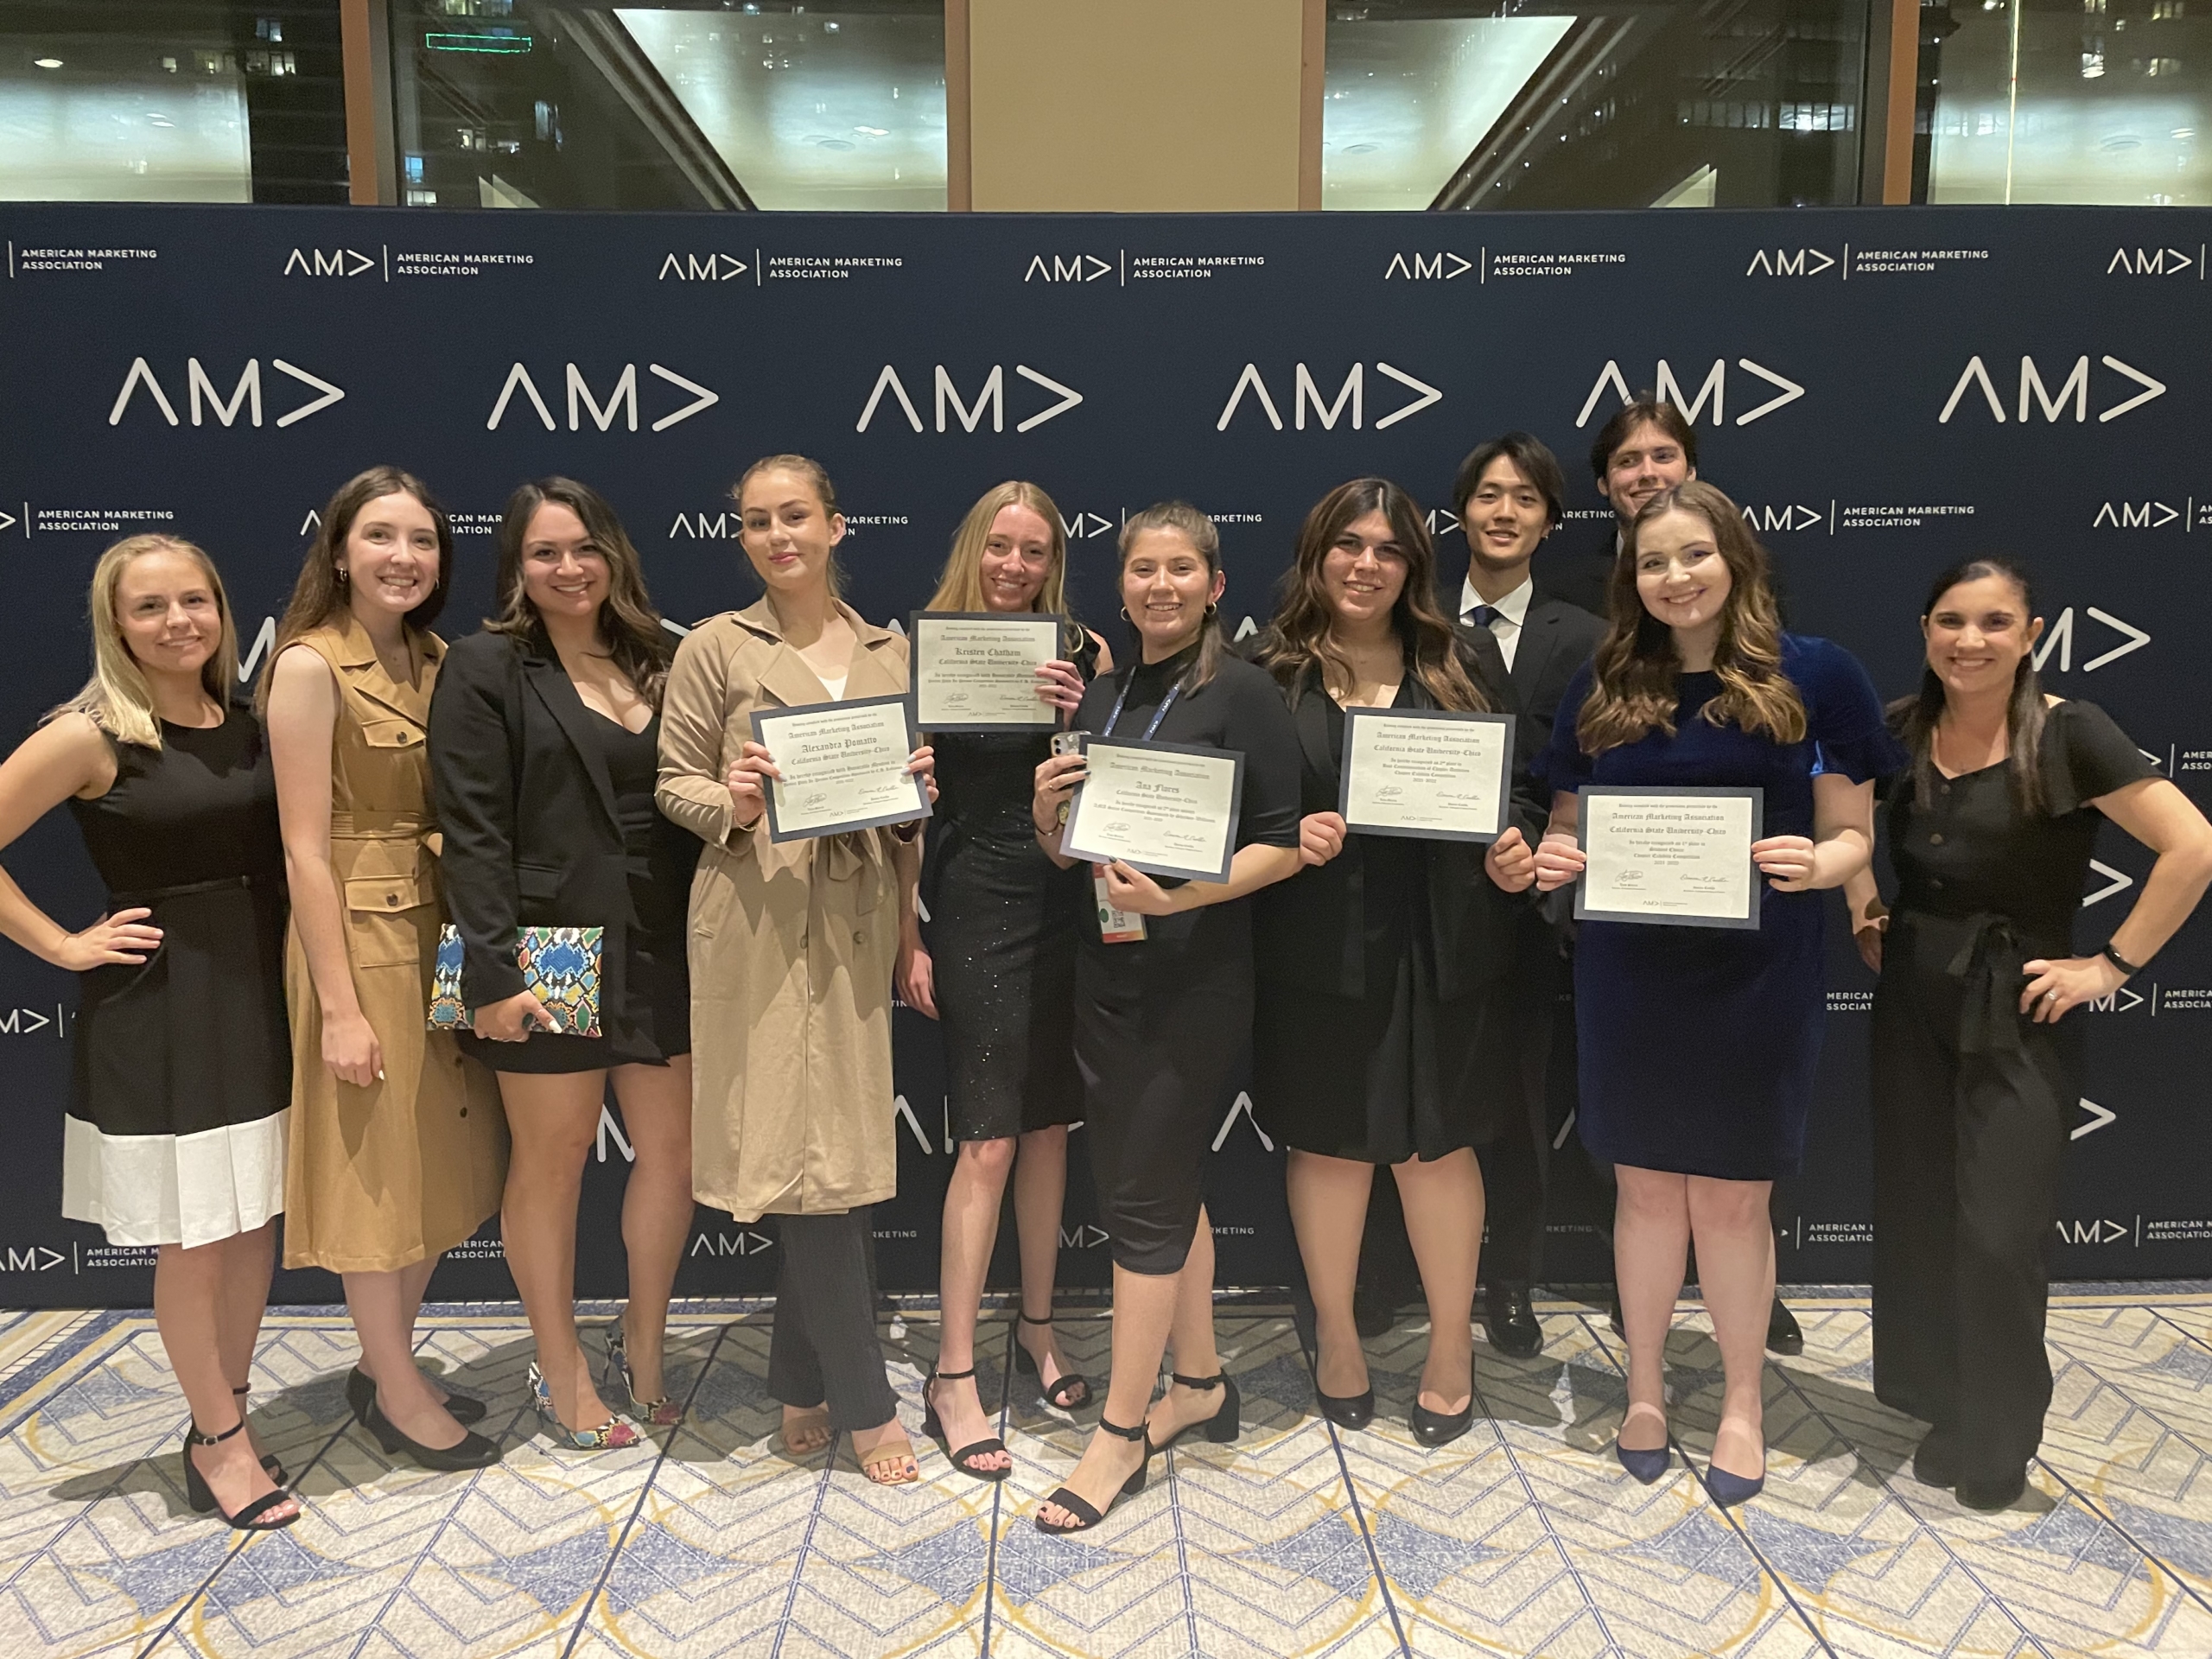 Students stand with their award certificates at the international AMA competition.